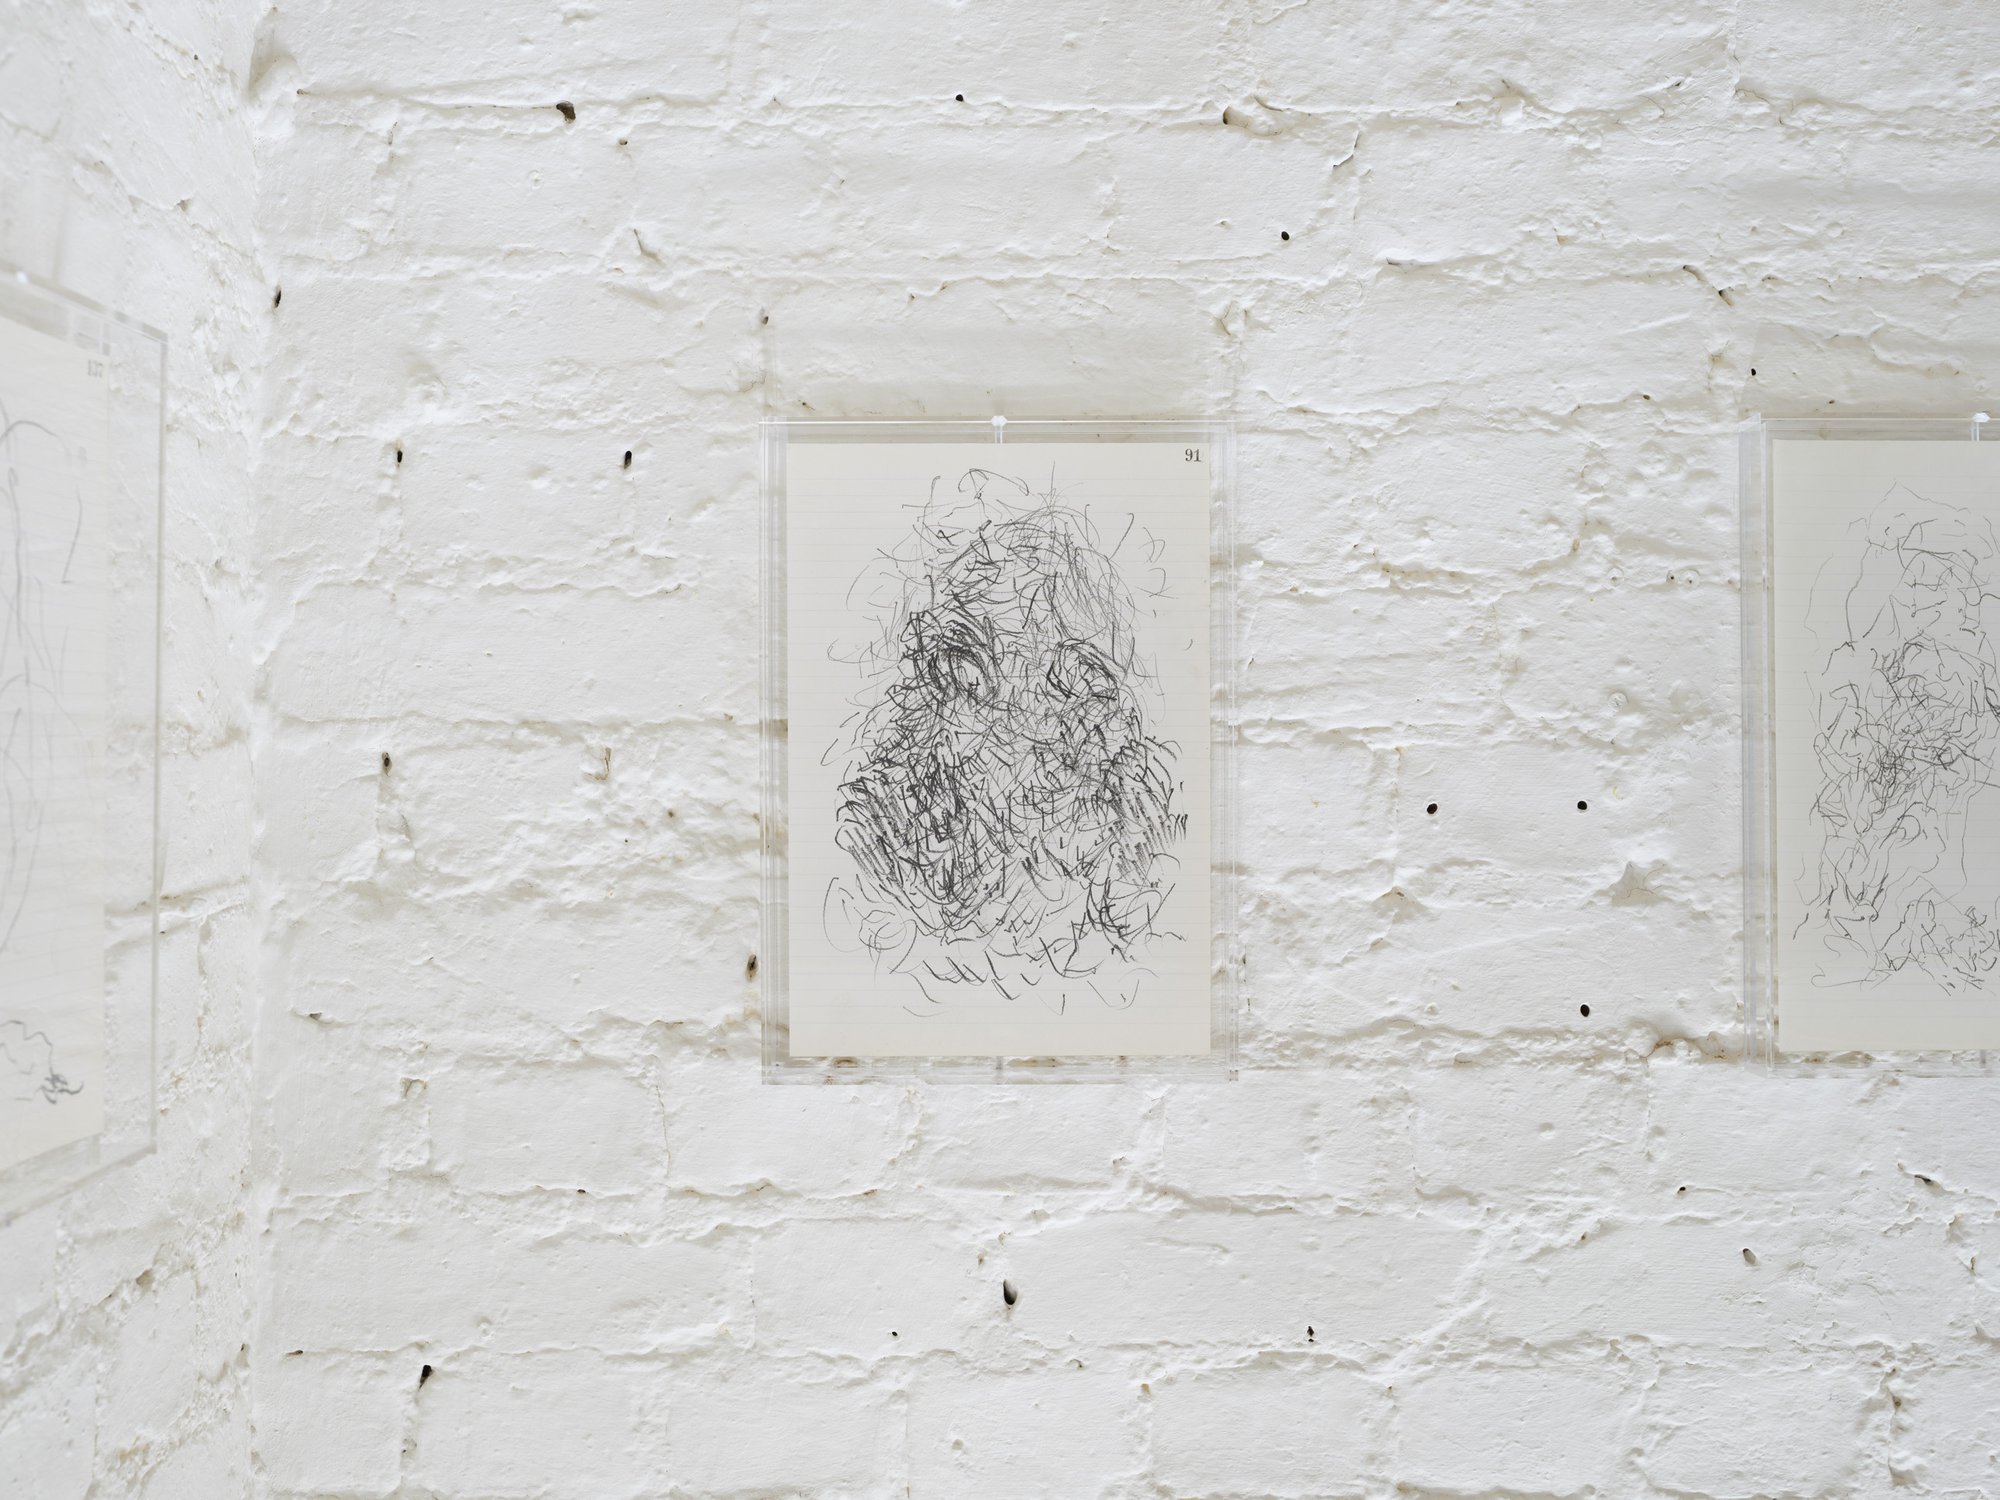 Haris Epaminonda, Untitled (91), graphite and pencil on paper, slide plate with plexi hood, 32.4 x 22.4 x 3.3 cm, 2023